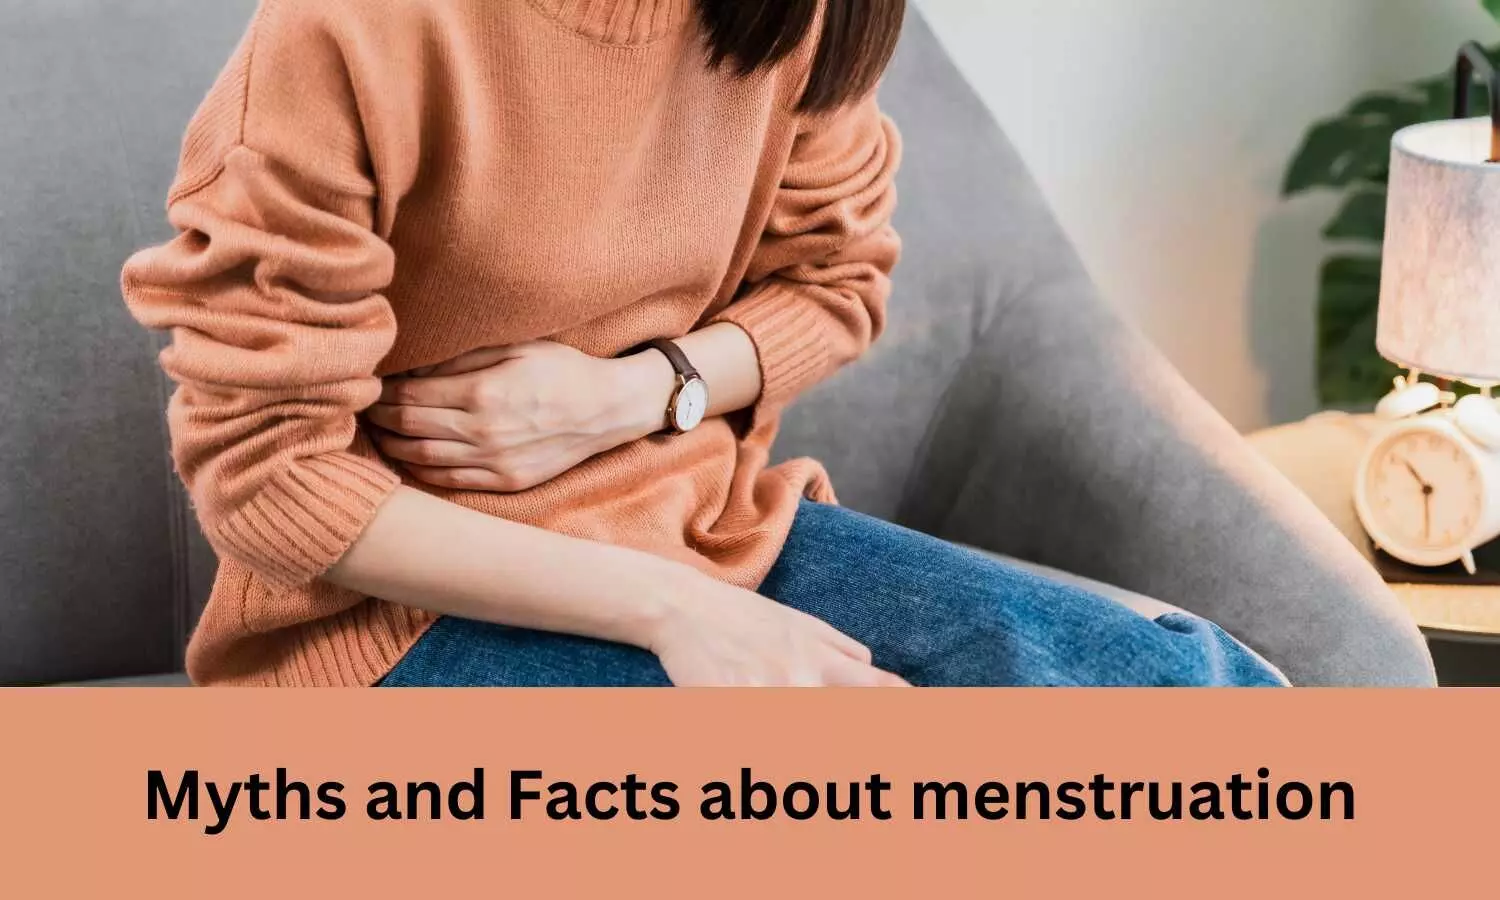 Myths and facts about menstruation